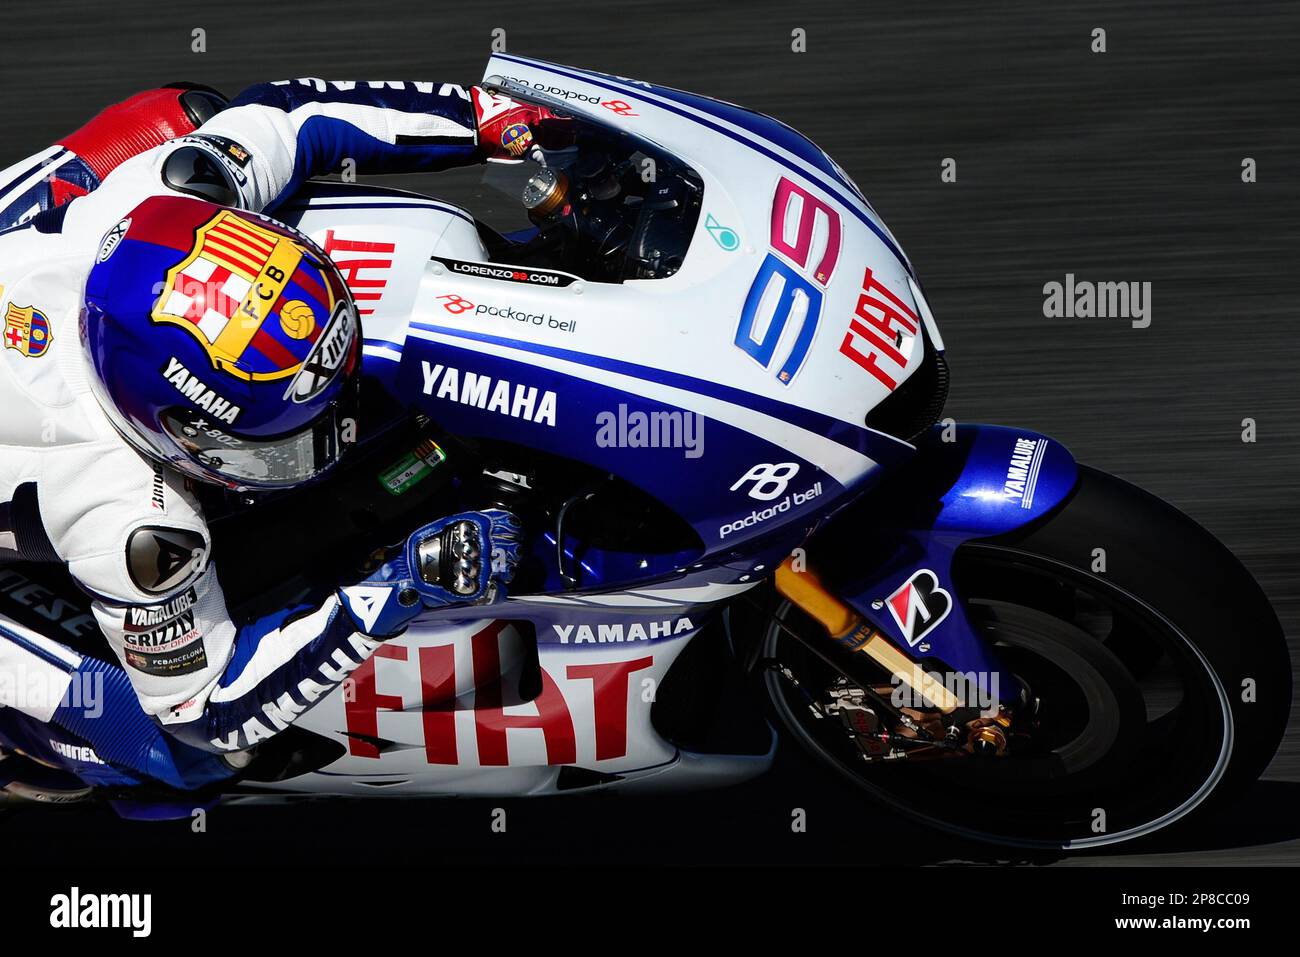 MotoGP rider Jorge Lorenzo from Spain drives his Yamaha to get the pole  position ahead of teammate Yamaha's Italian Valentino Rossi during the  practice session of the Catalunya Grand Prix at the